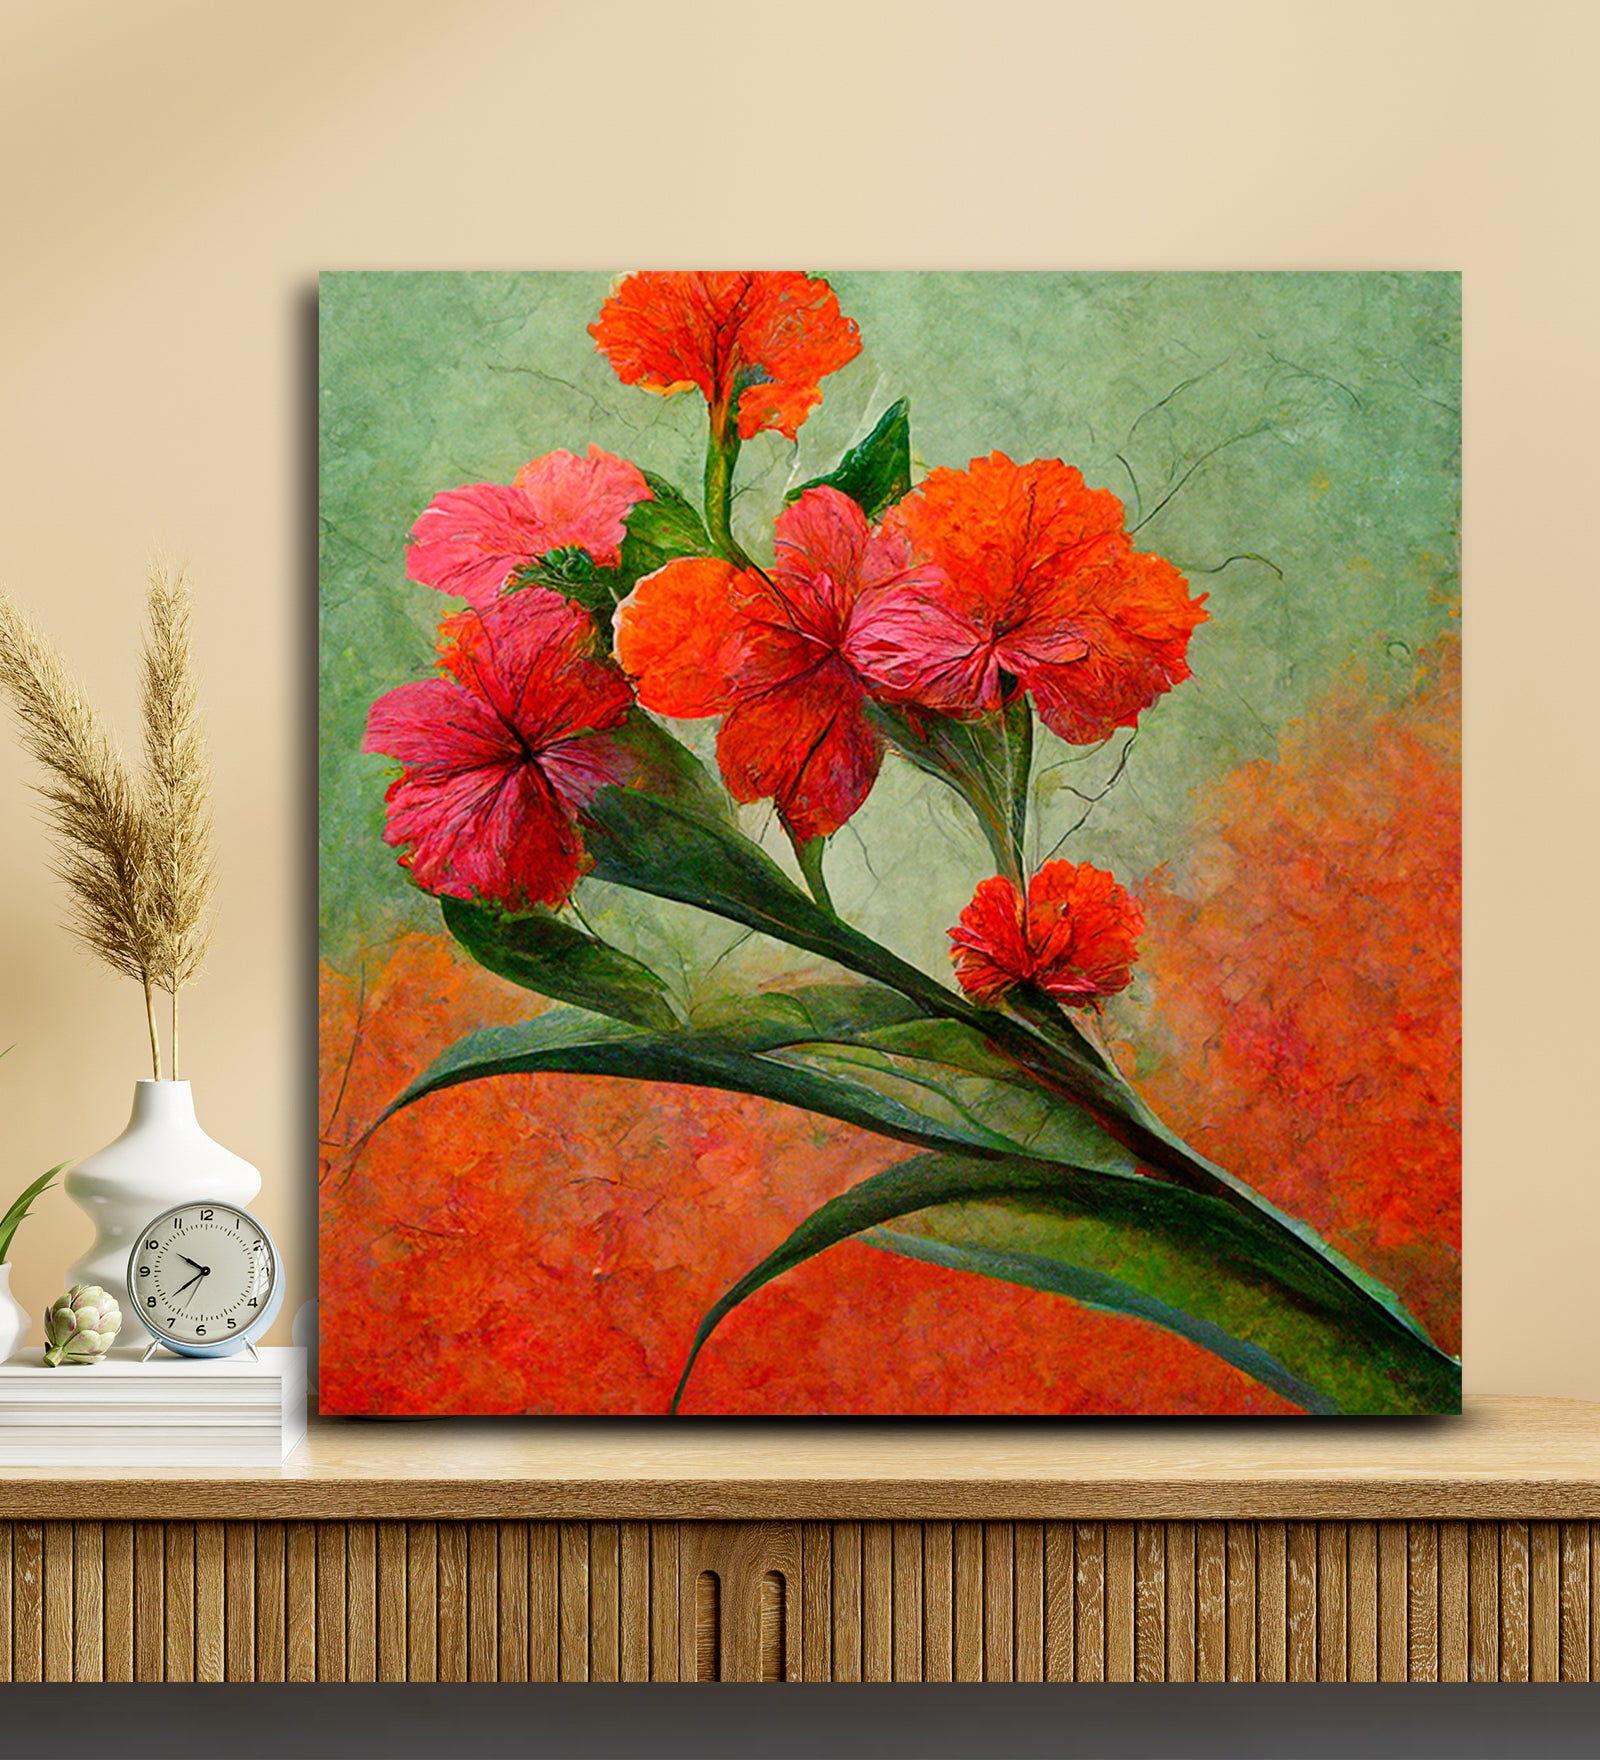 The Power of Simplicity: A Canvas Filled with the Beauty of Red Flowers